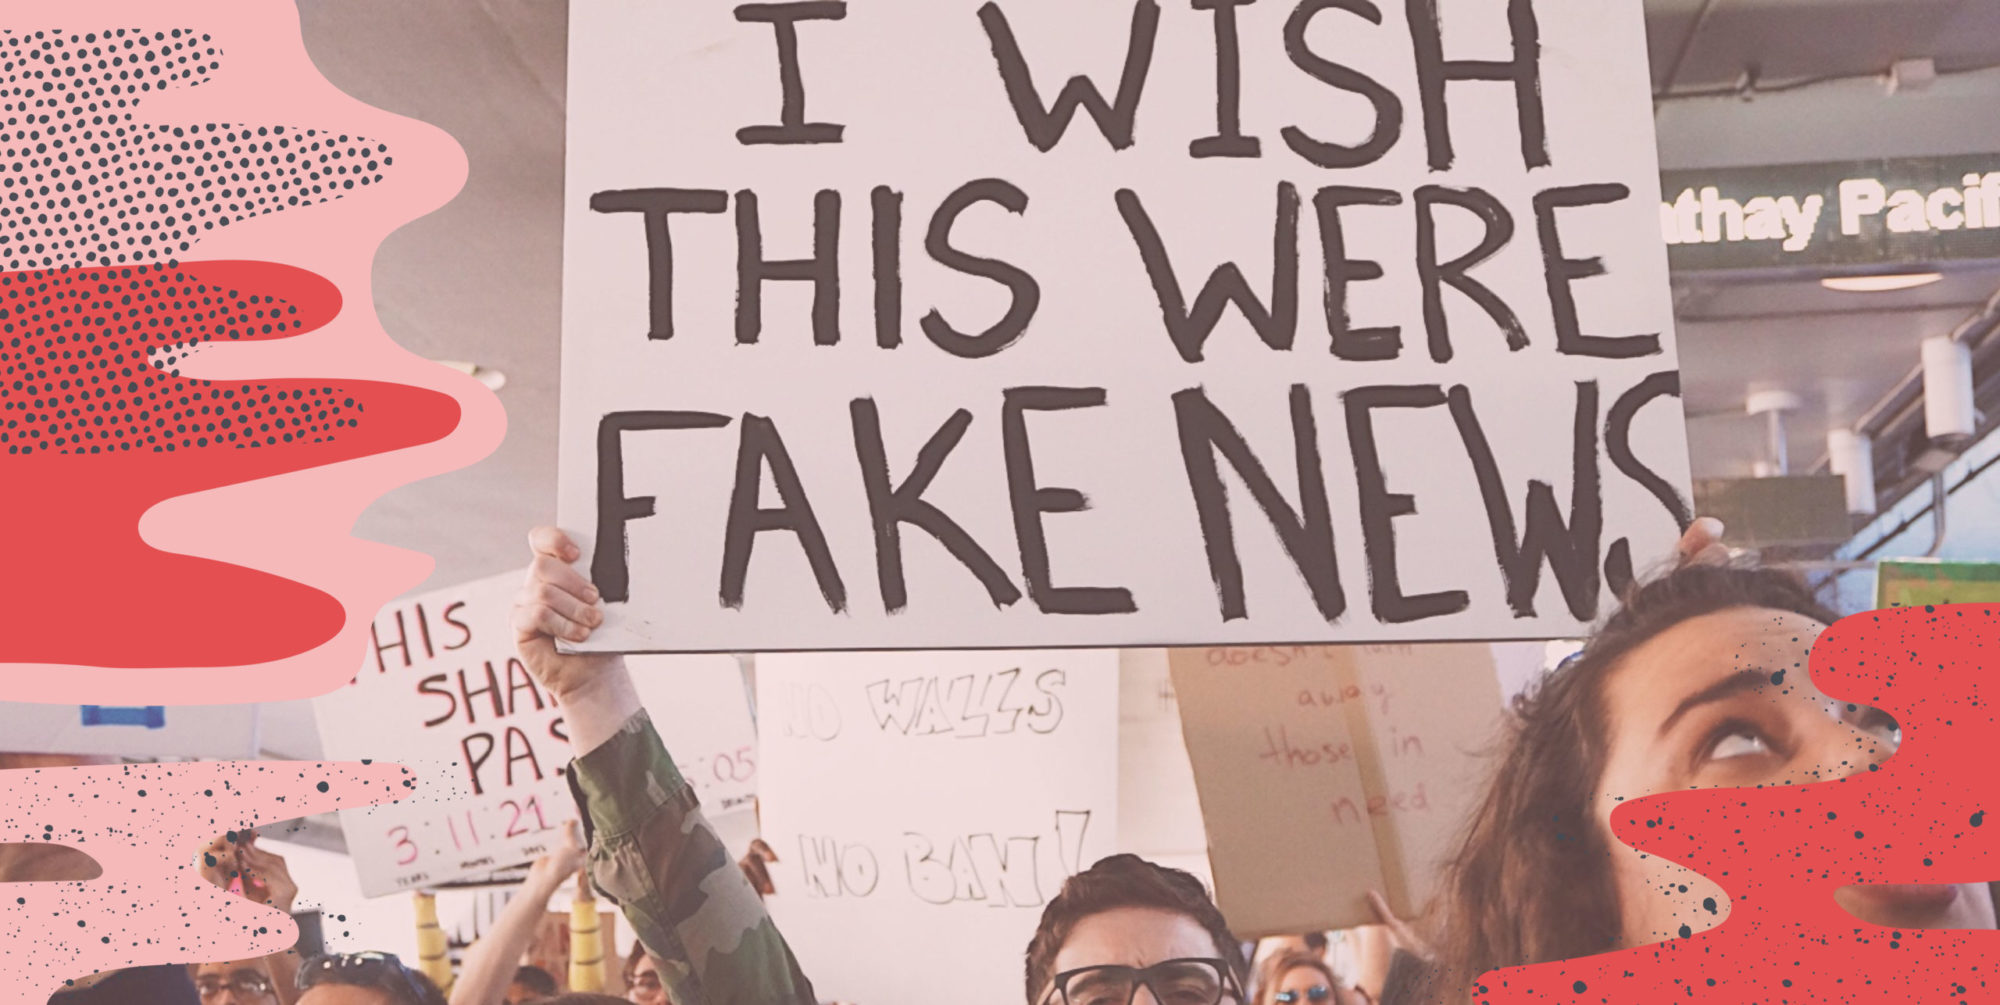 A person standing in a crowd holding a sign that says, " I wish this were fake news"